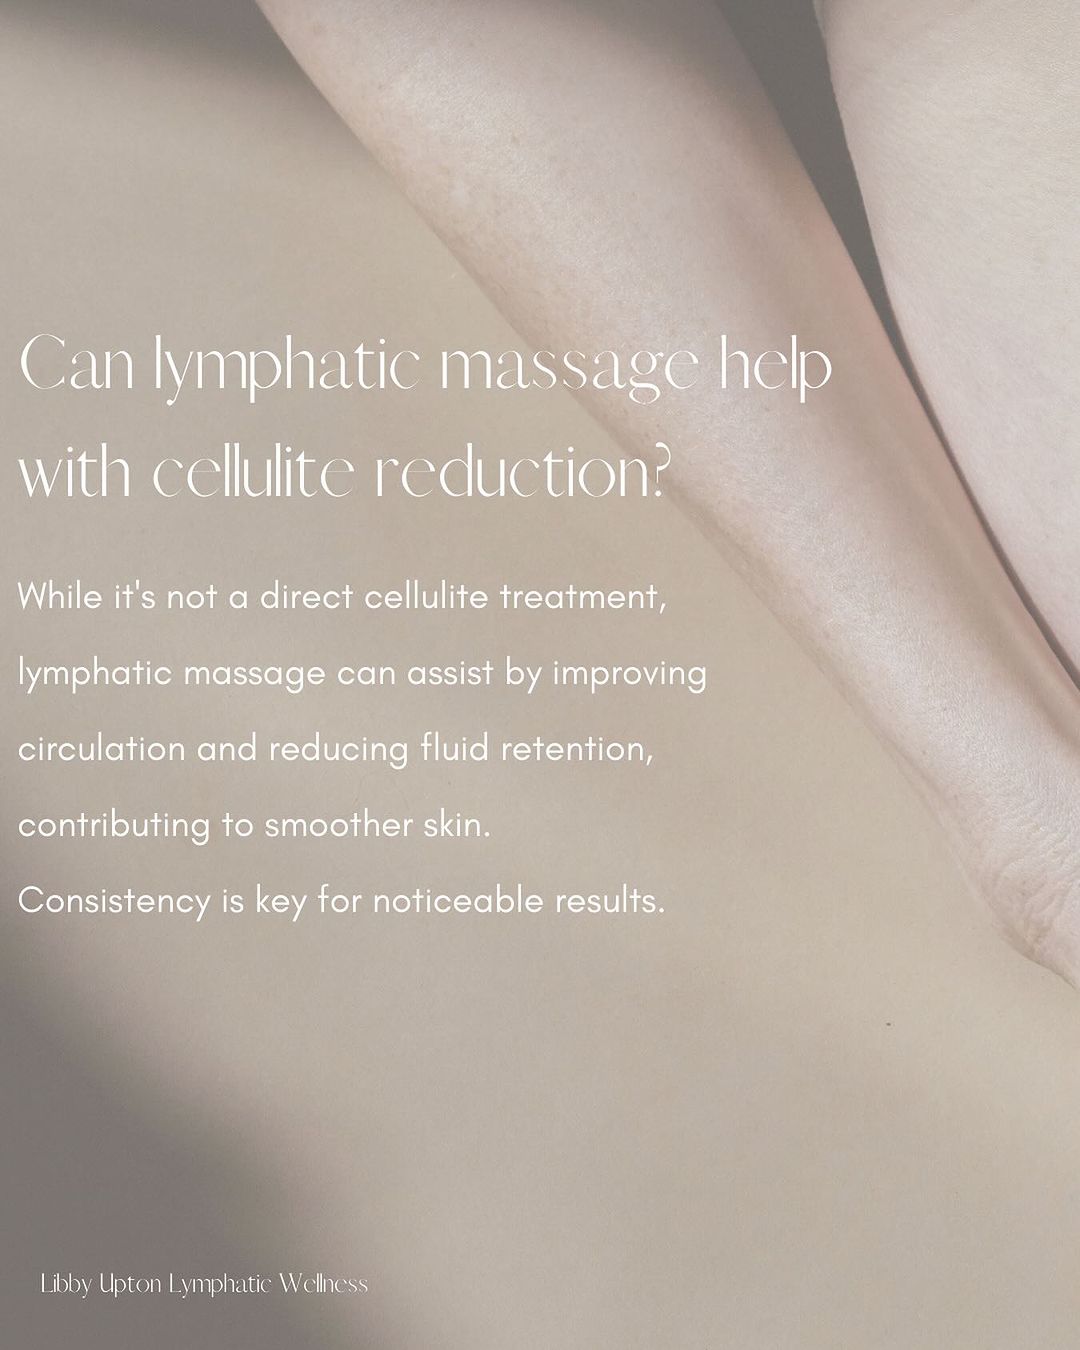 Improve lymph flow for the appearance of smoother looking legs by releasing f...